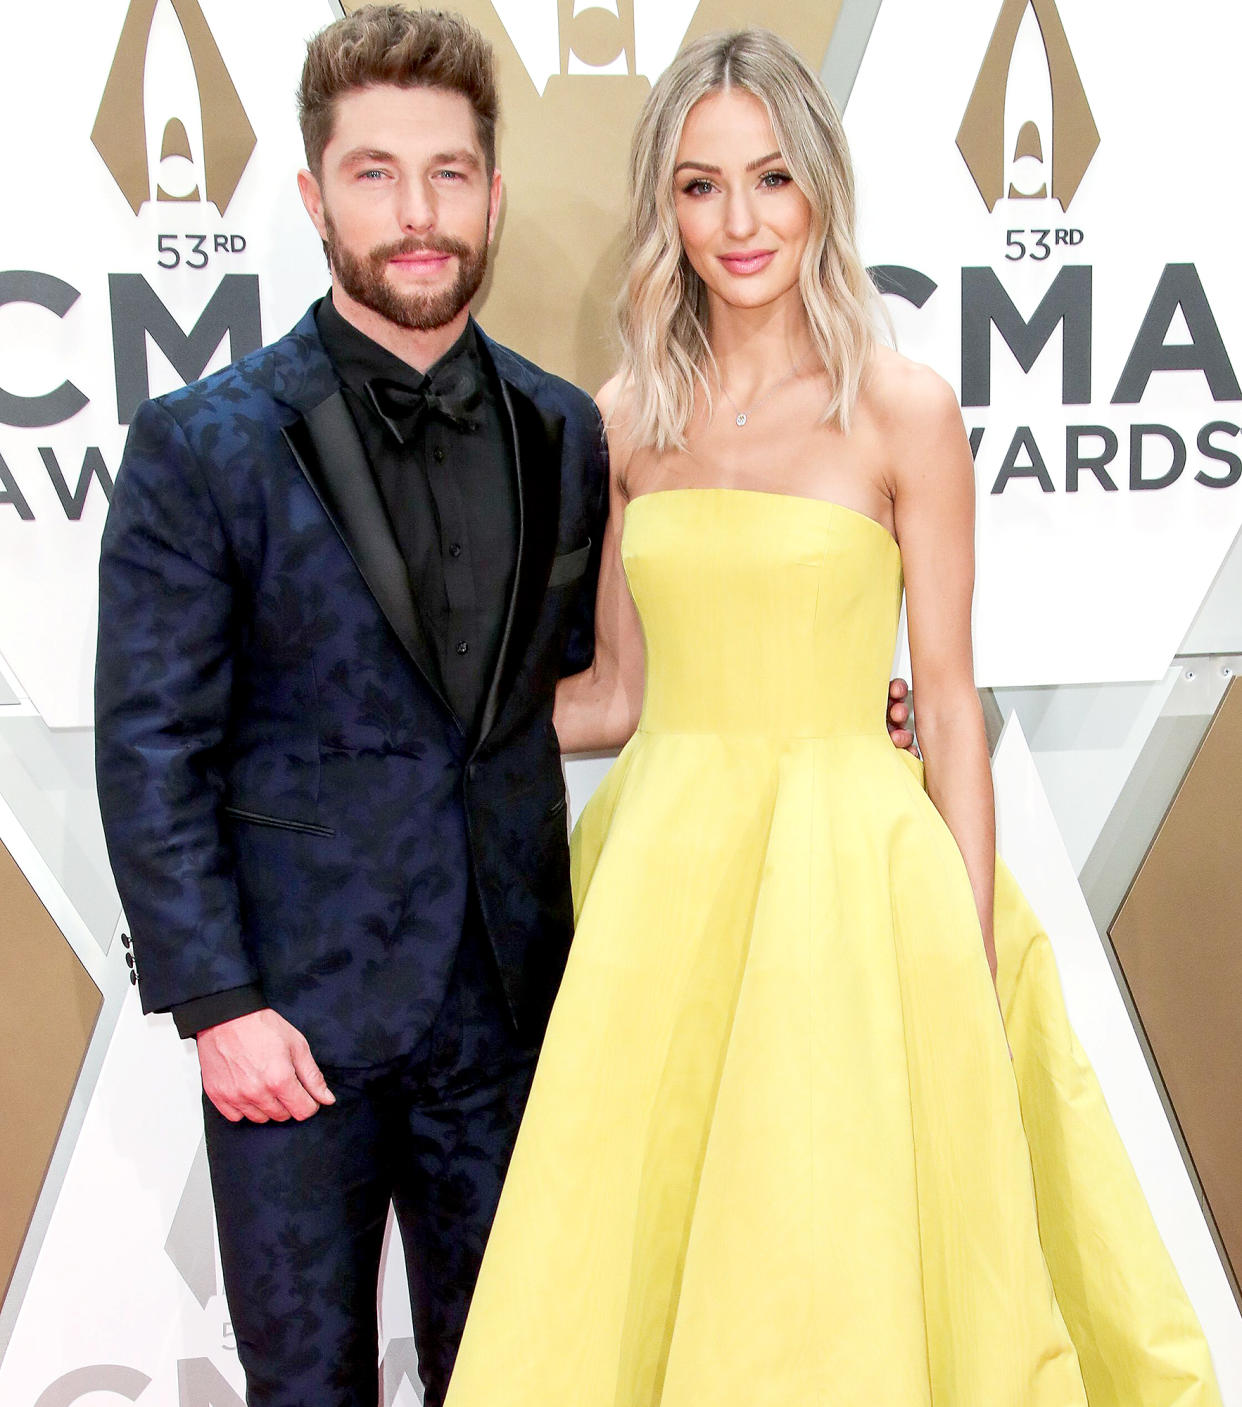 Chris Lane Teases That He's Secretly Hoping Pregnant Wife Lauren Bushnell Has a Baby Boy